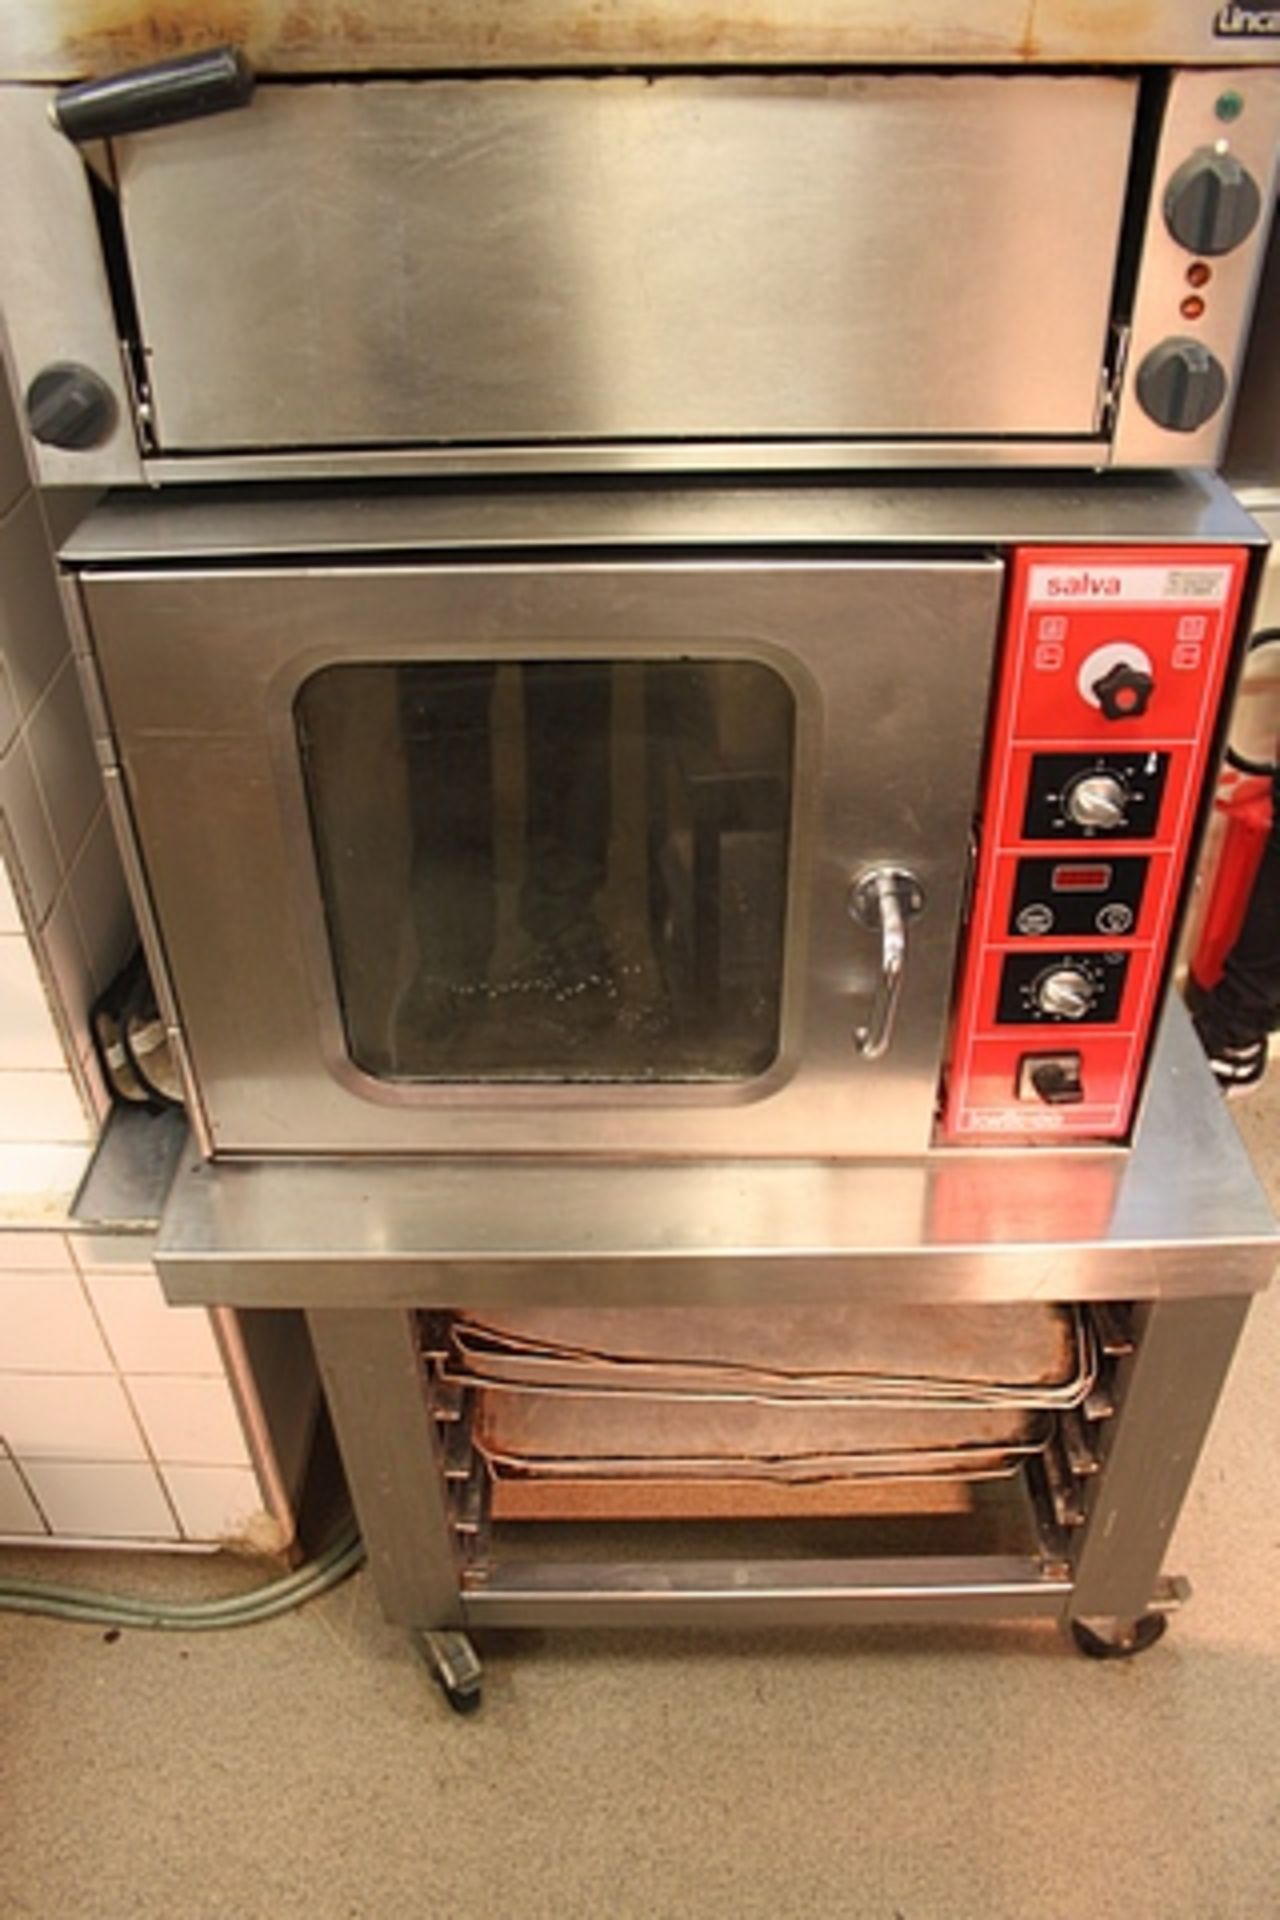 Salva electric bake off oven 4 trays GN 1/1 50 meals capacity on stainless steel stand 114849